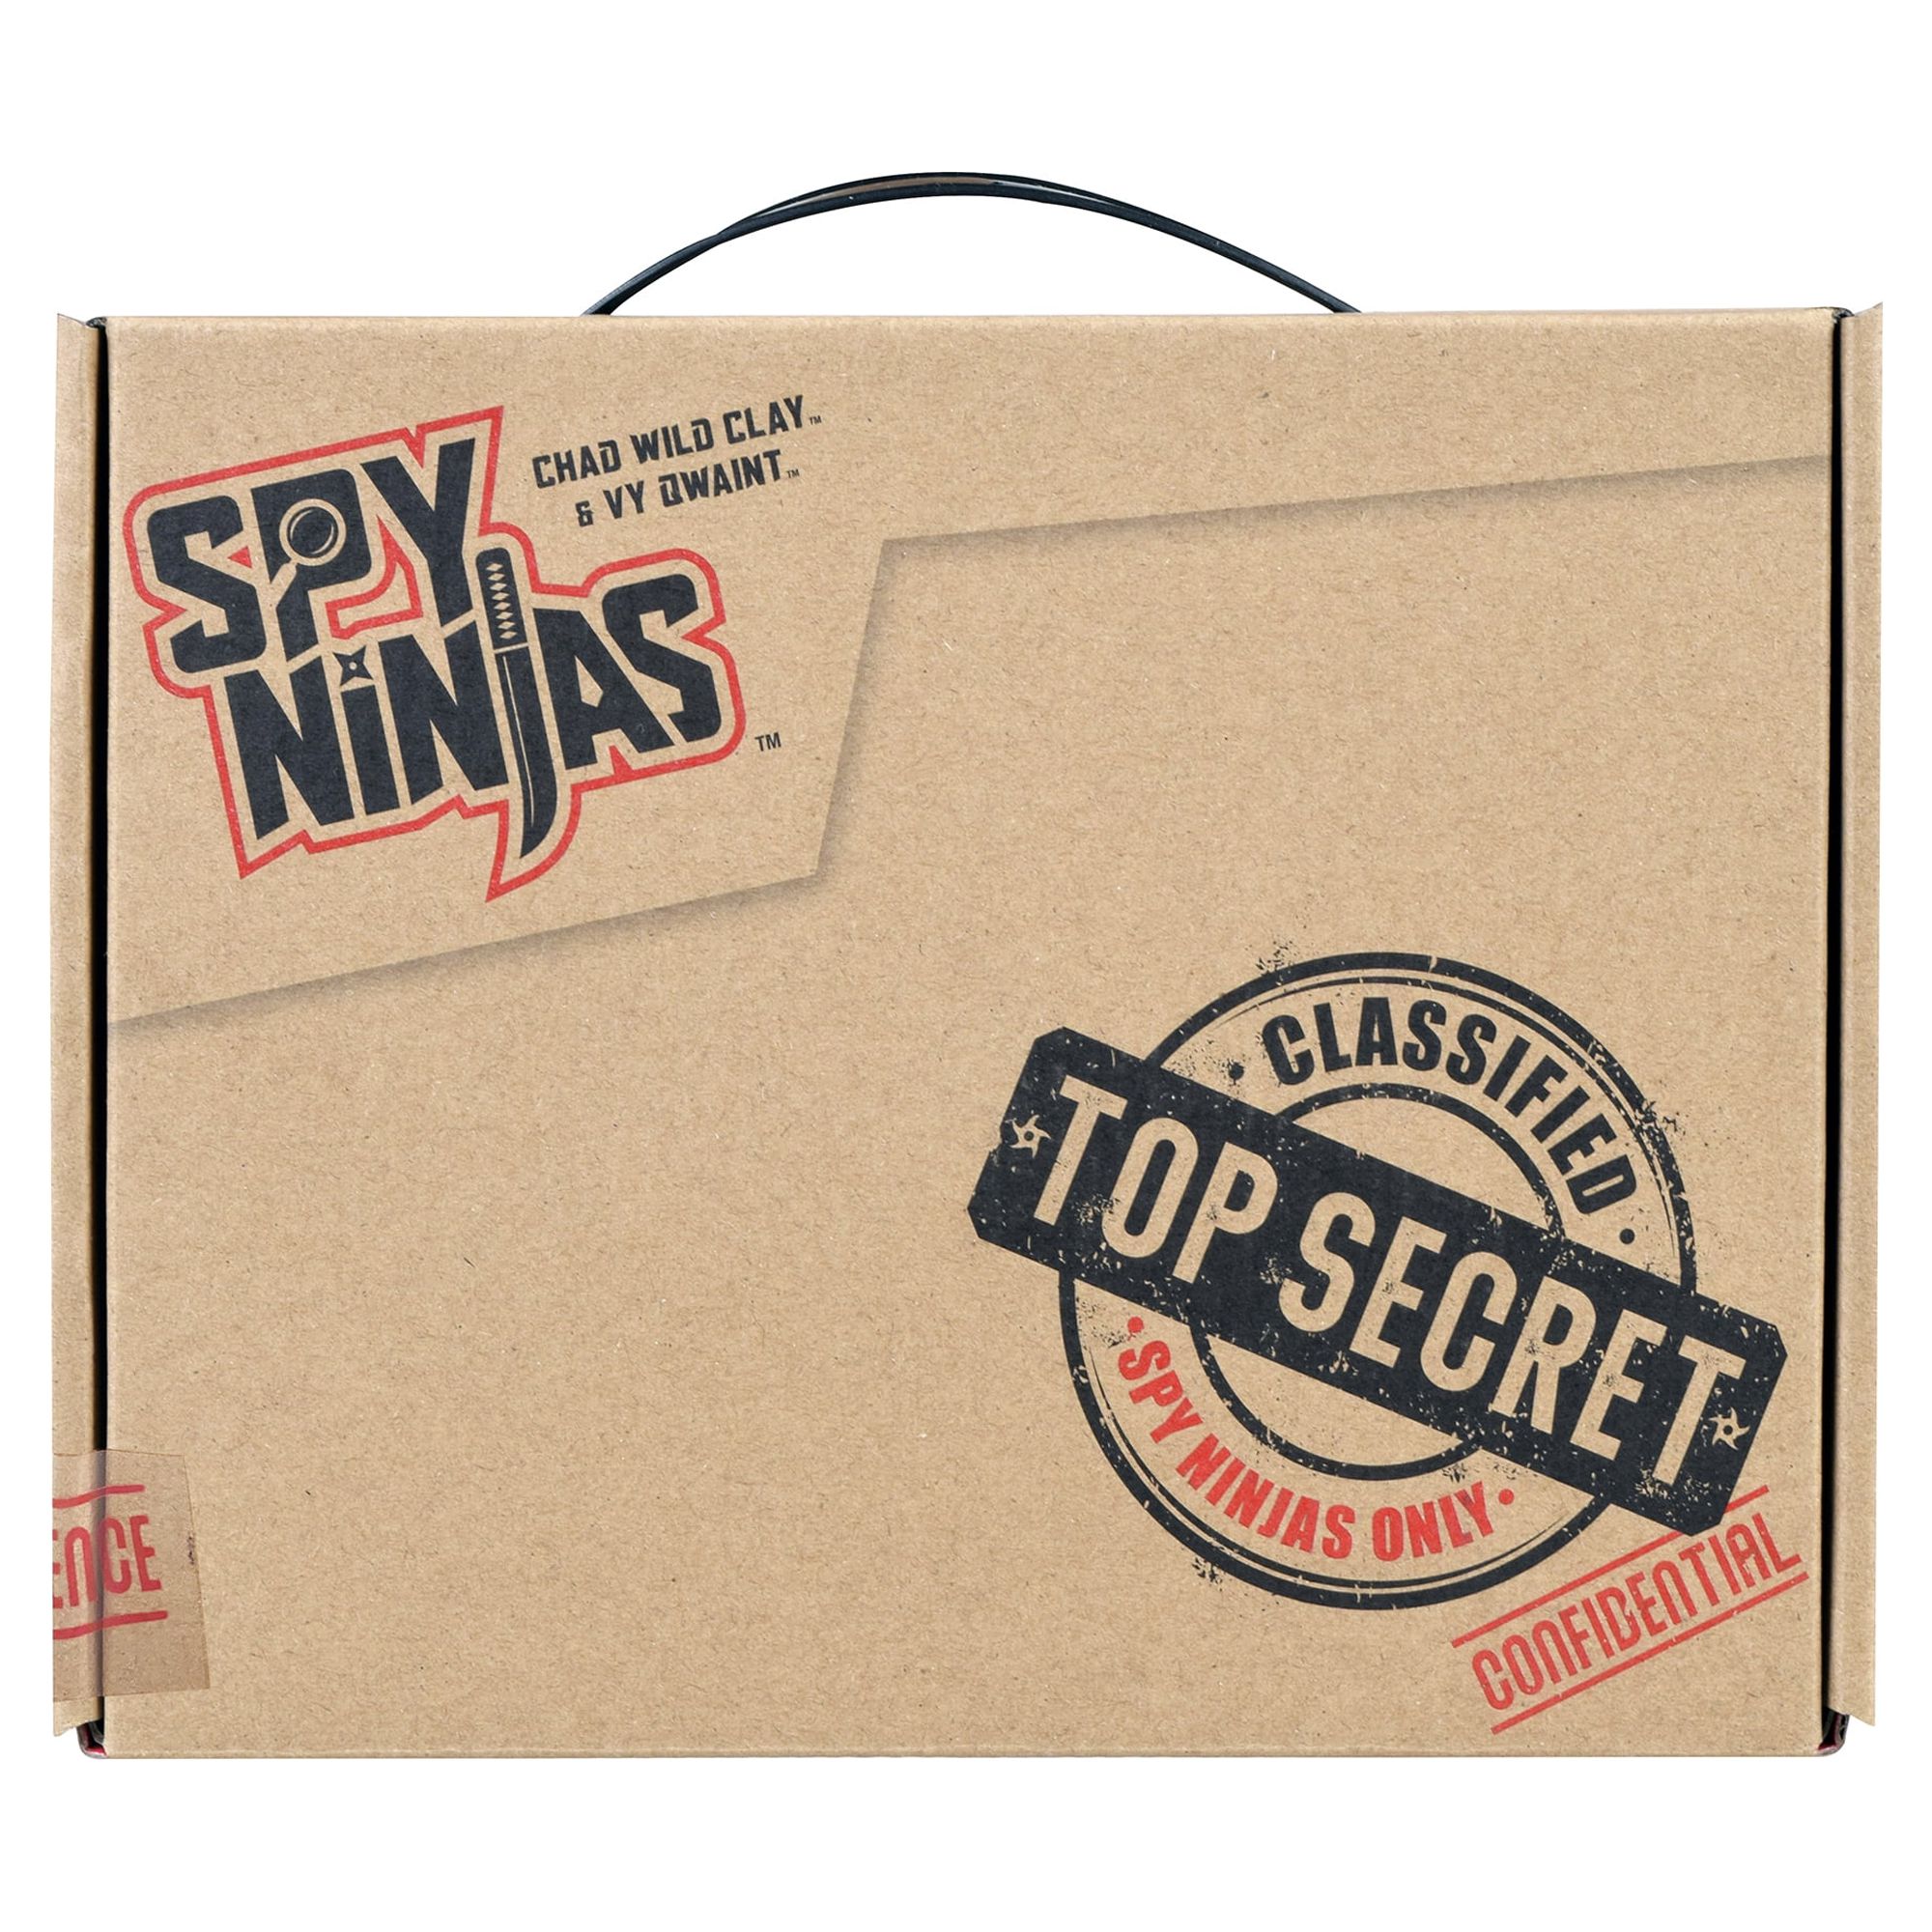 Spy Ninjas New Recruit Mission Kit from Vy Qwaint and Chad Wild Clay - image 8 of 10